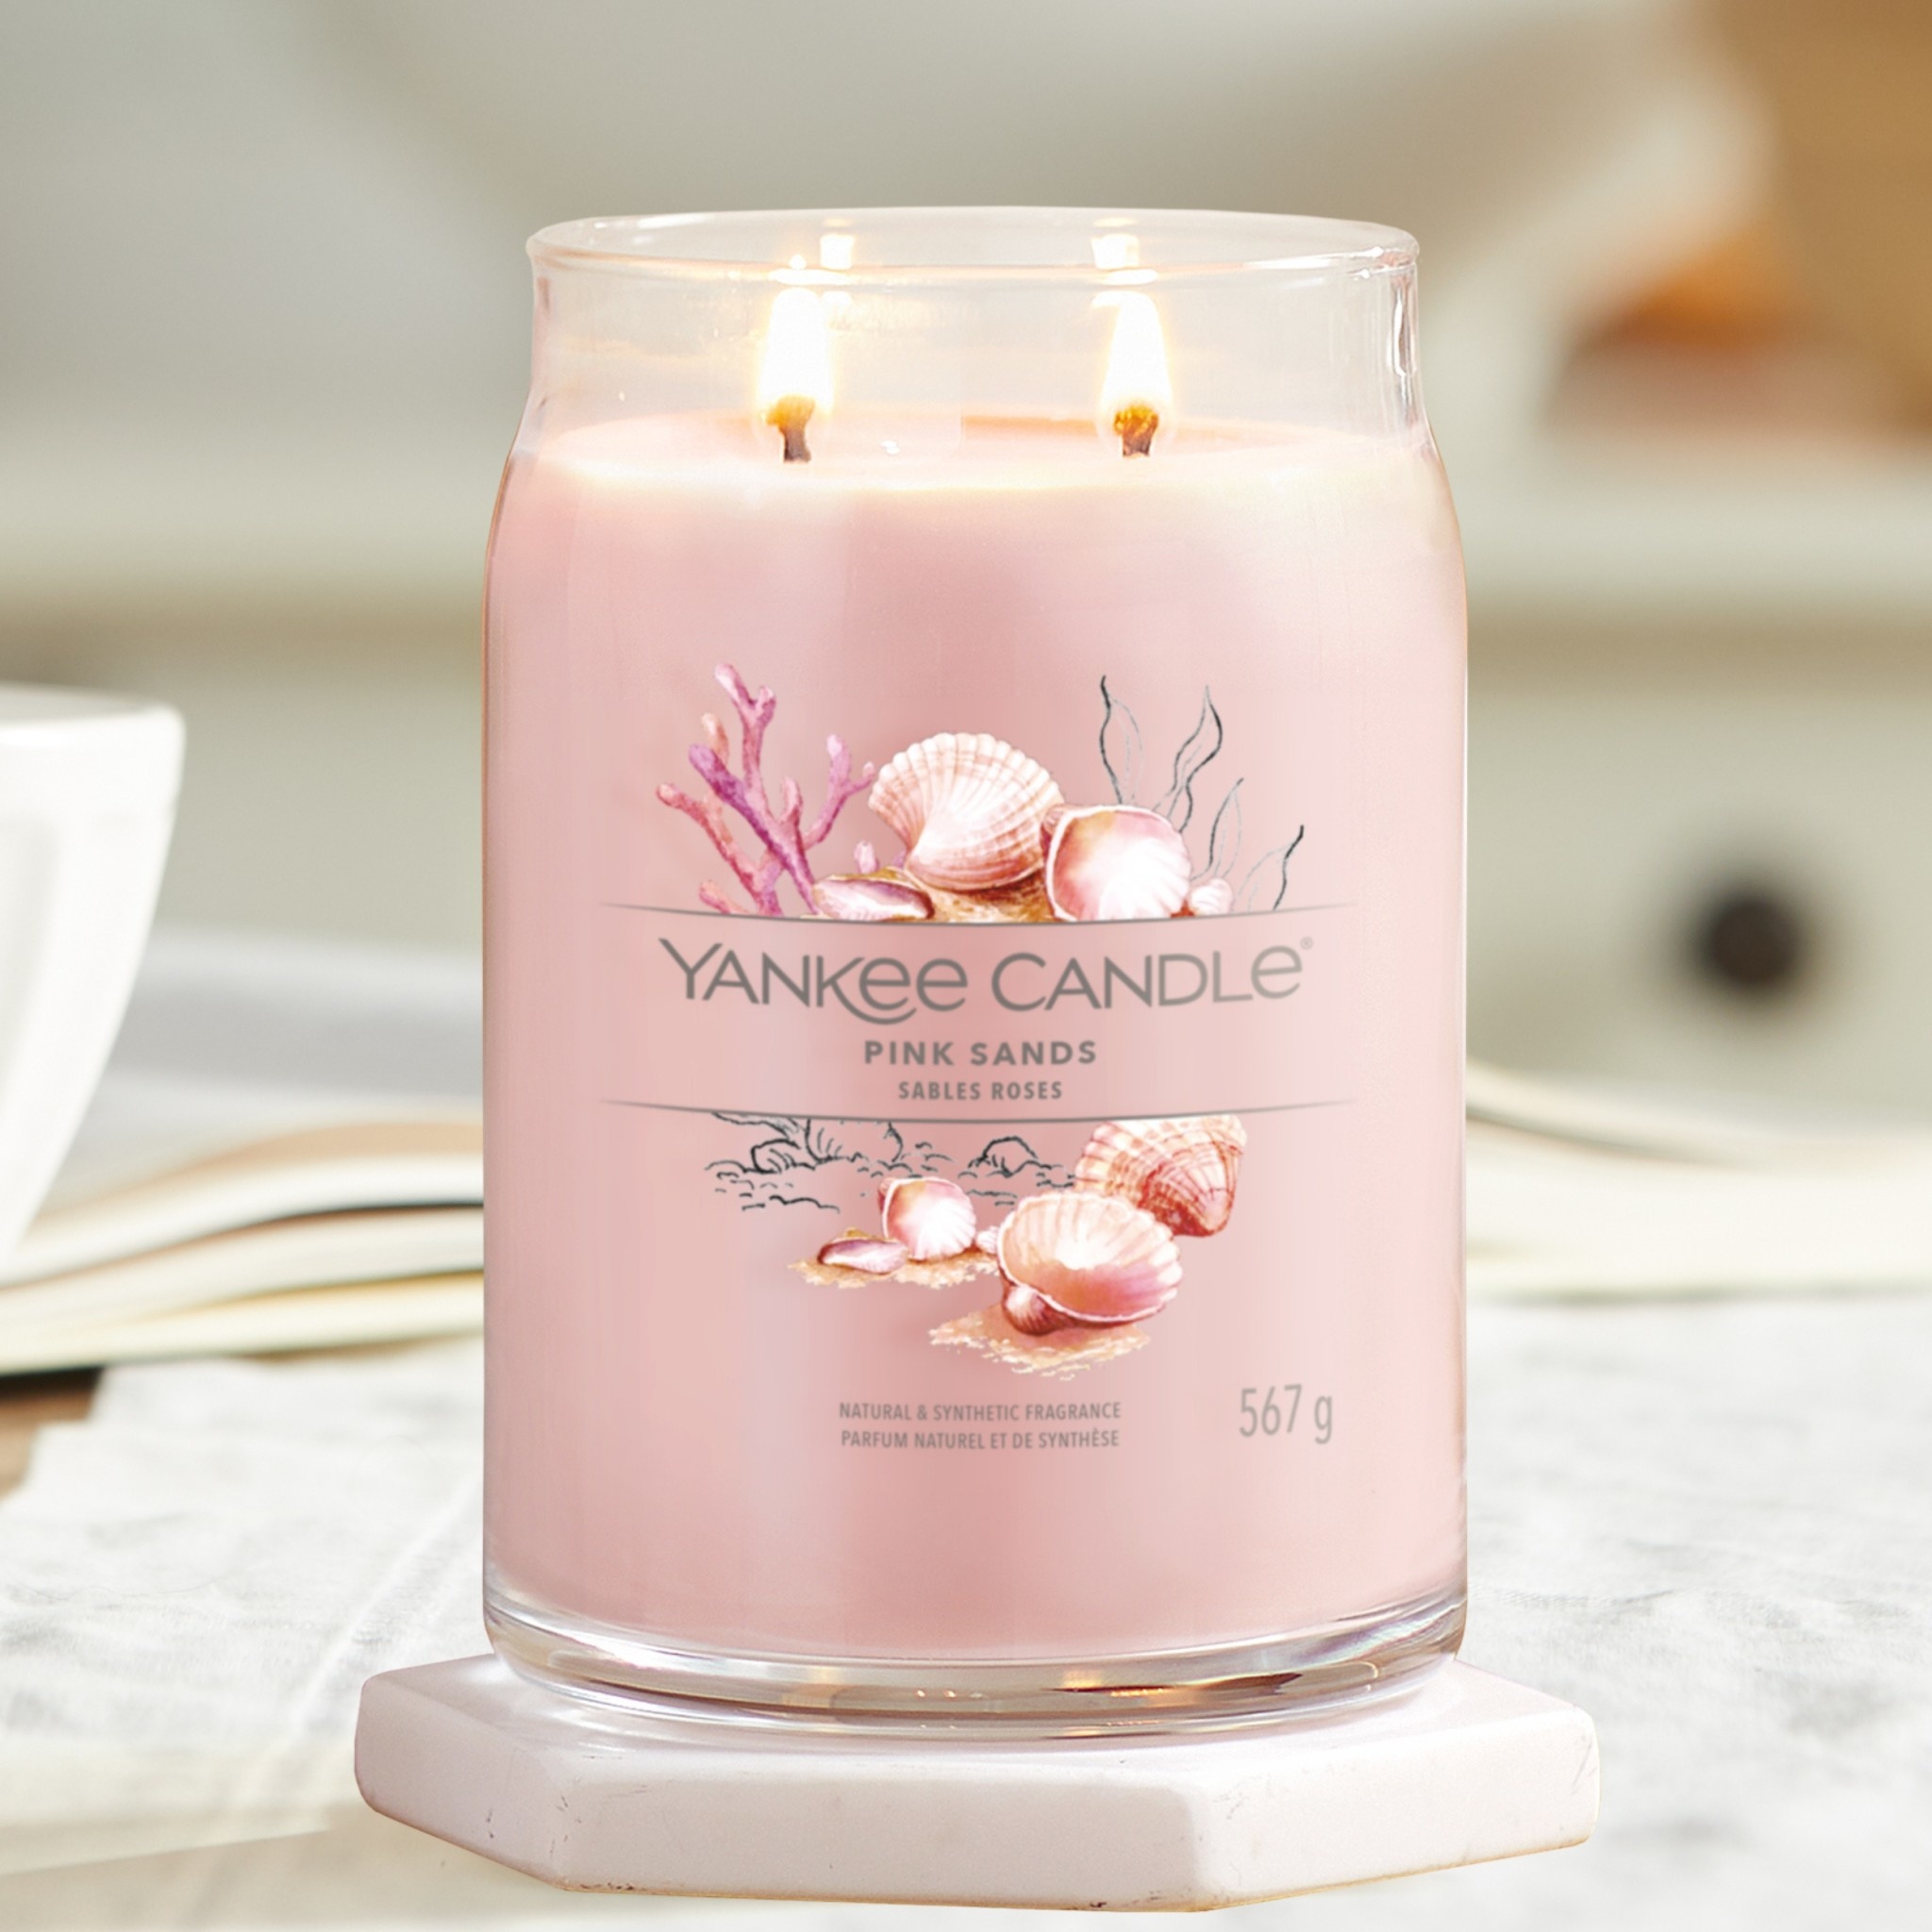 Pink Sands Signature Large Jar Scented Candle, Yankee Candle